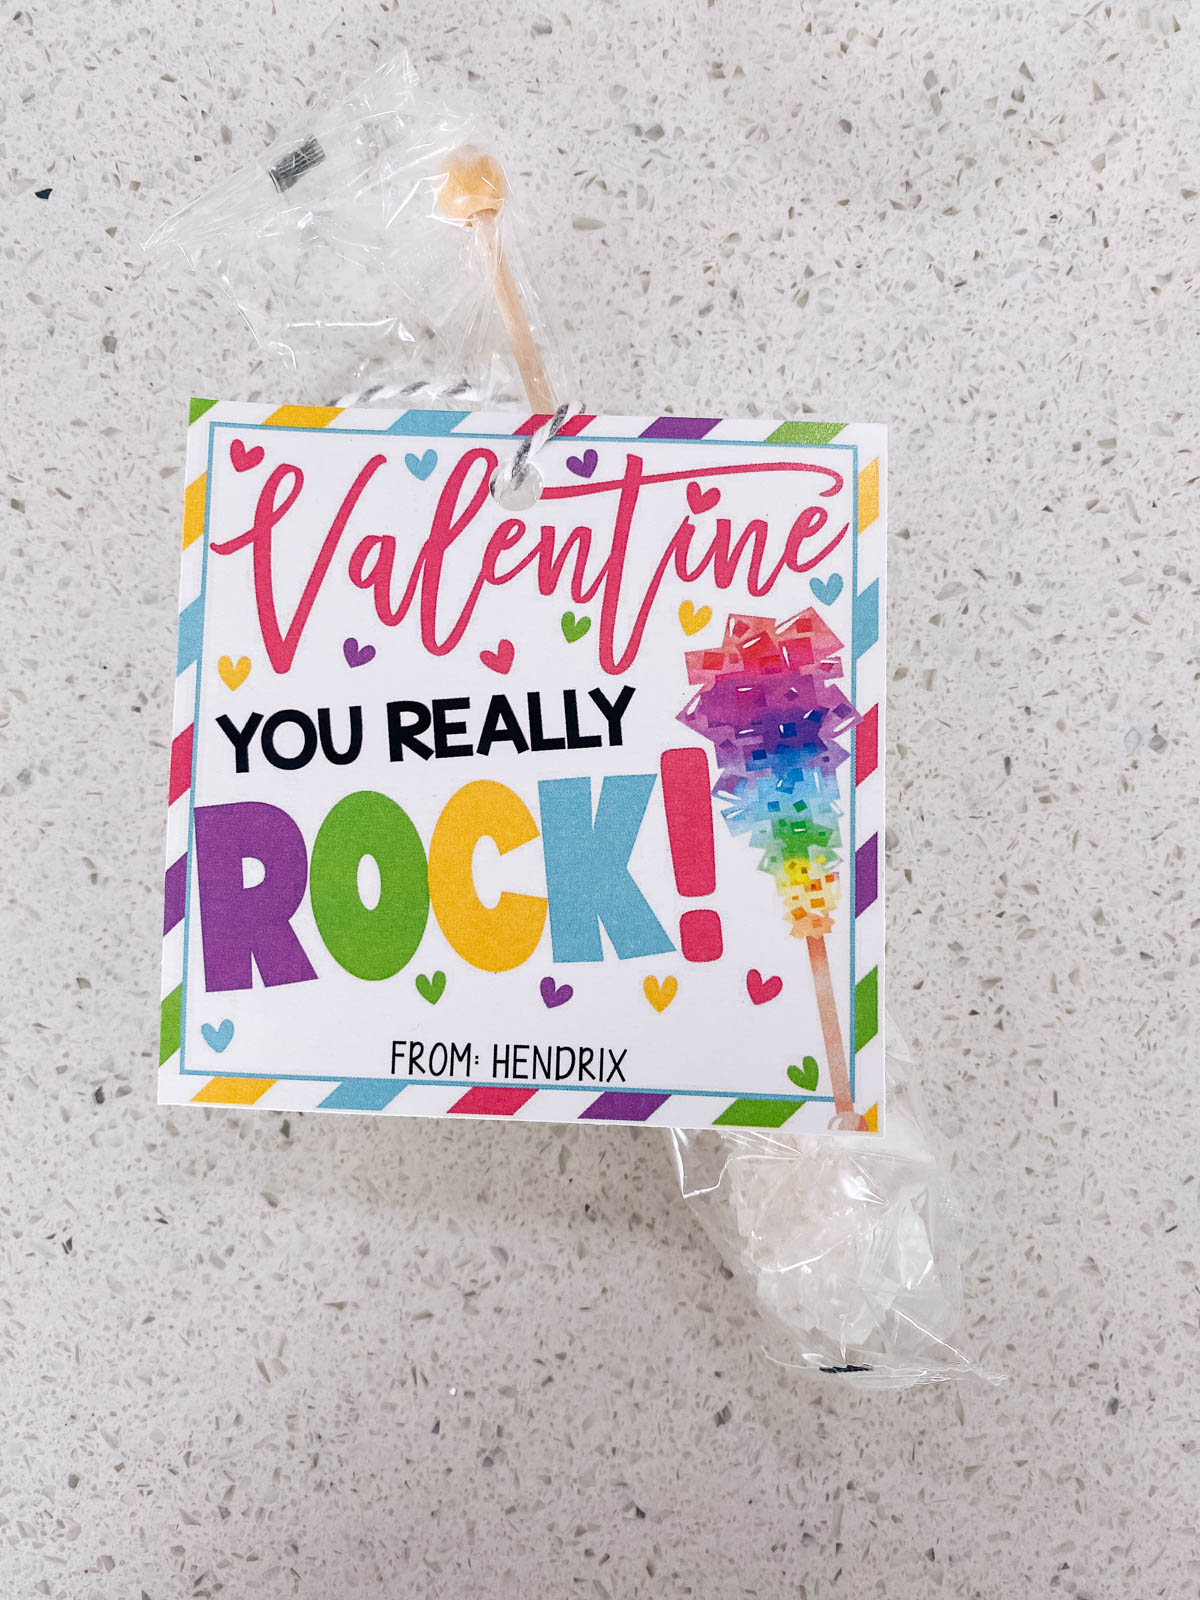 Rock candy in a plastic bag with a Valentine gift tag on kitchen counter.